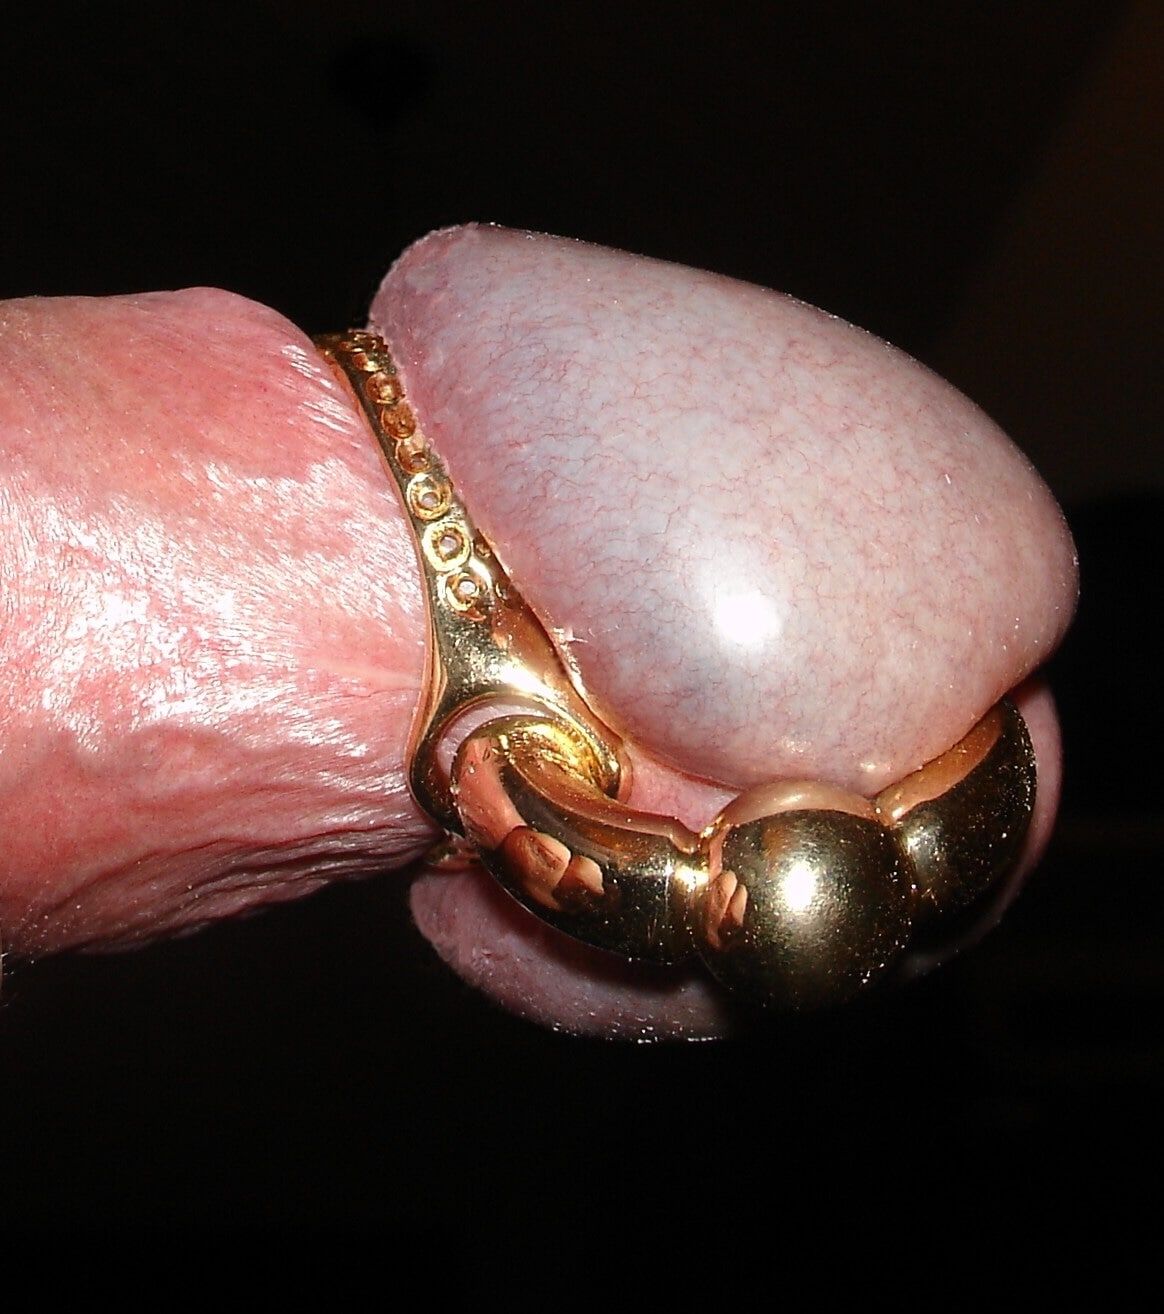 My cock with jewelry #13